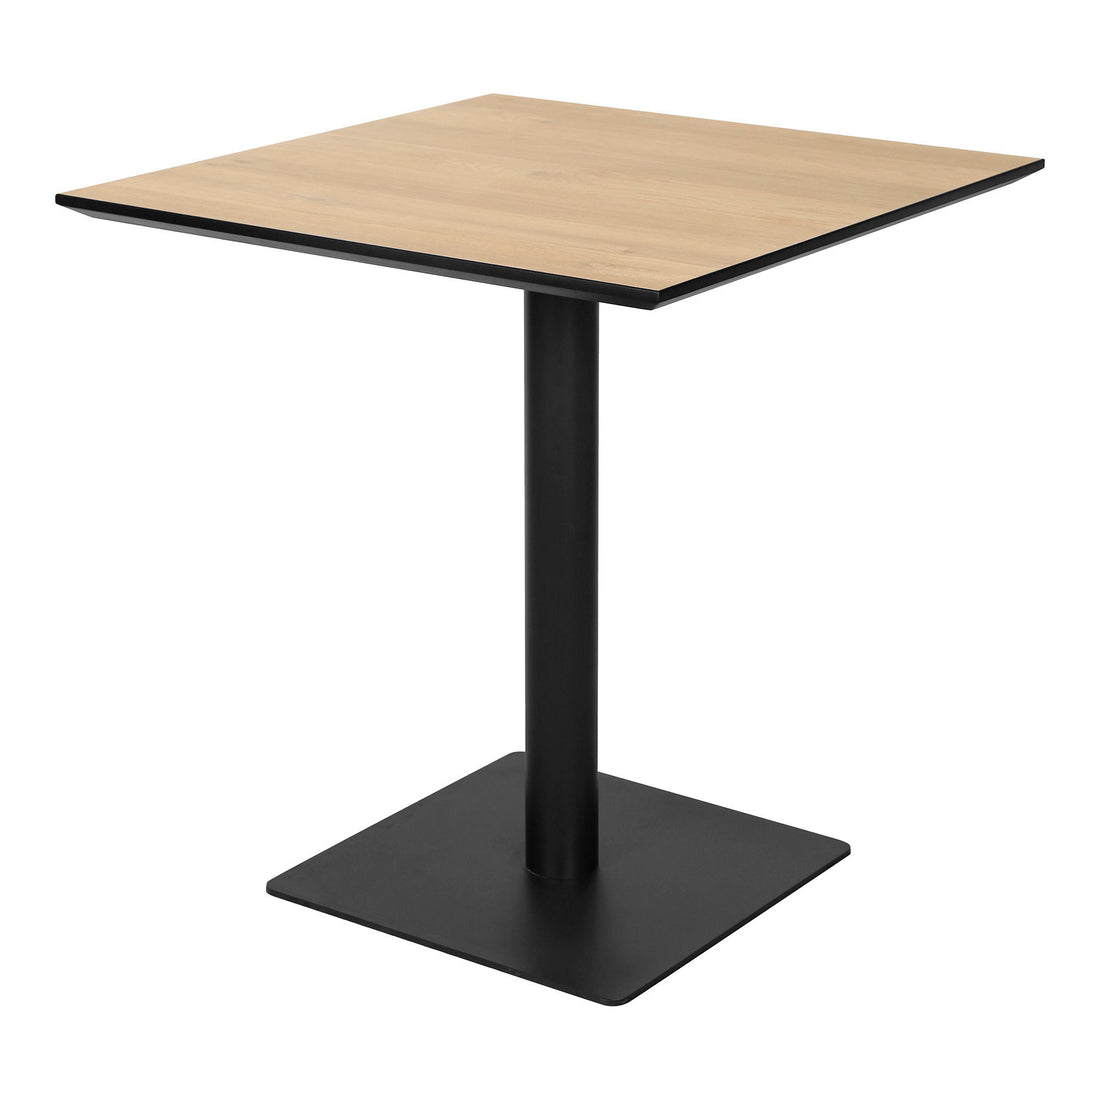 House Nordic - Como Dining Table